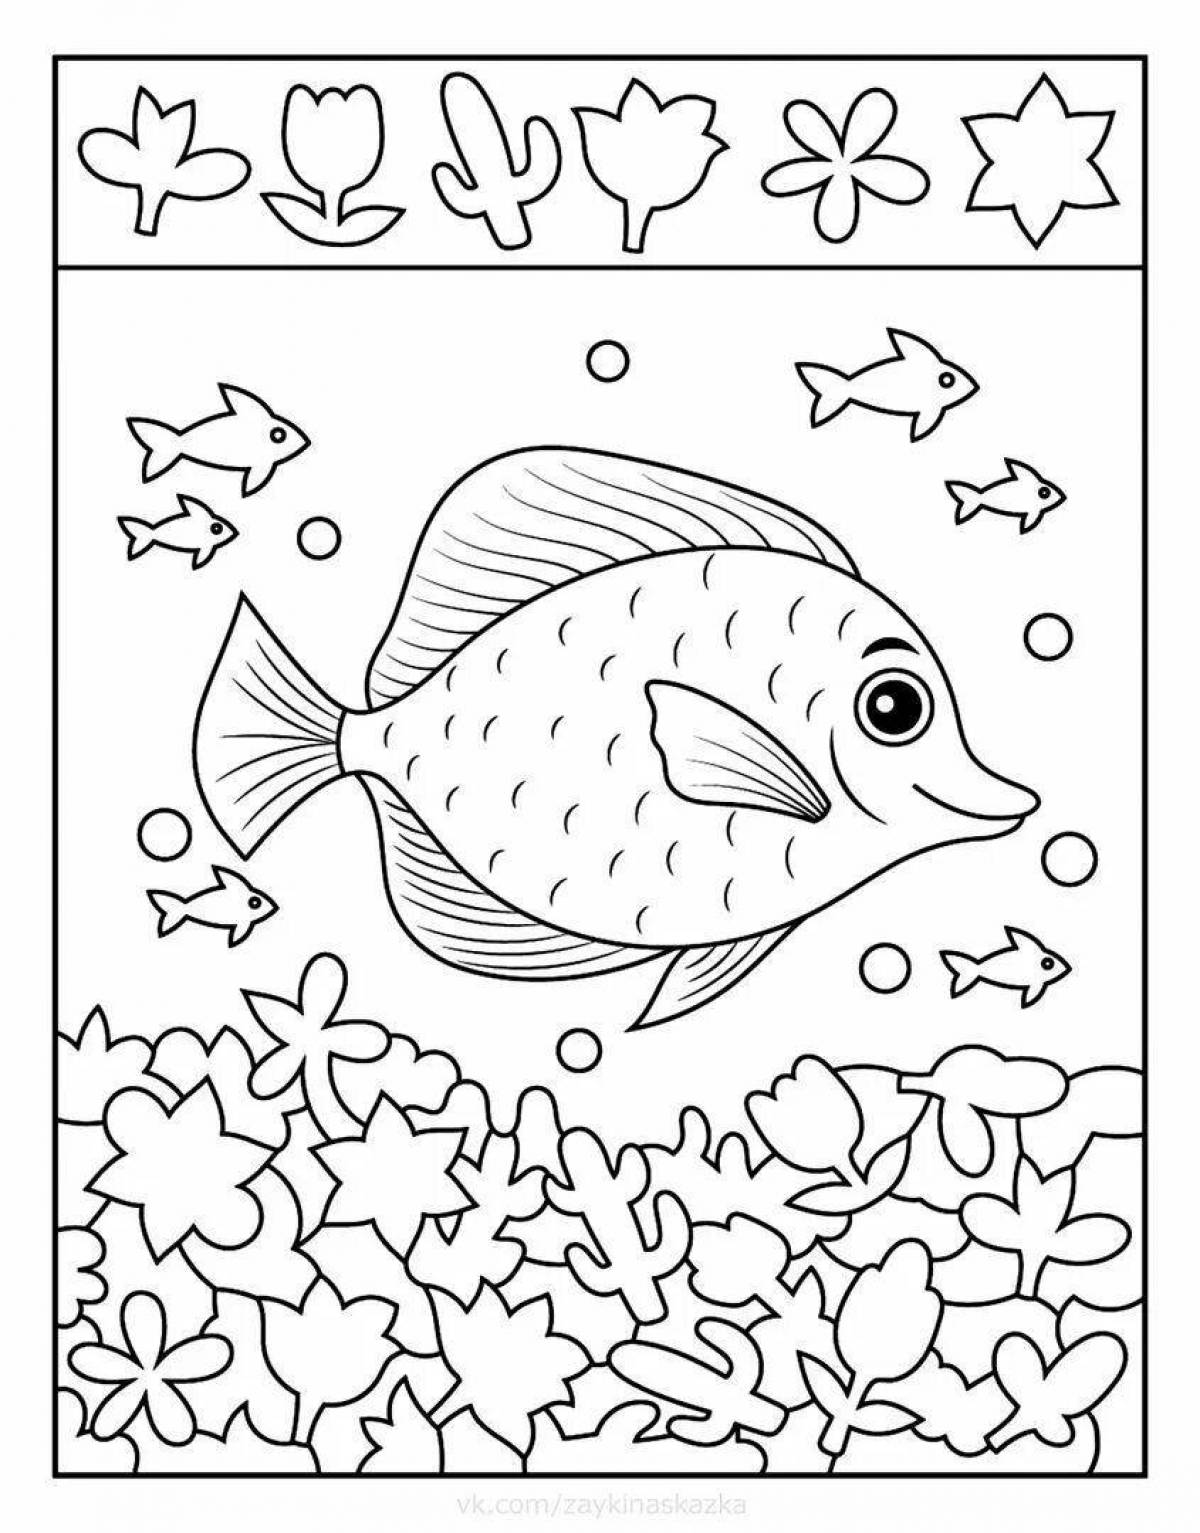 Creative aquarium fish coloring pages for 4-5 year olds